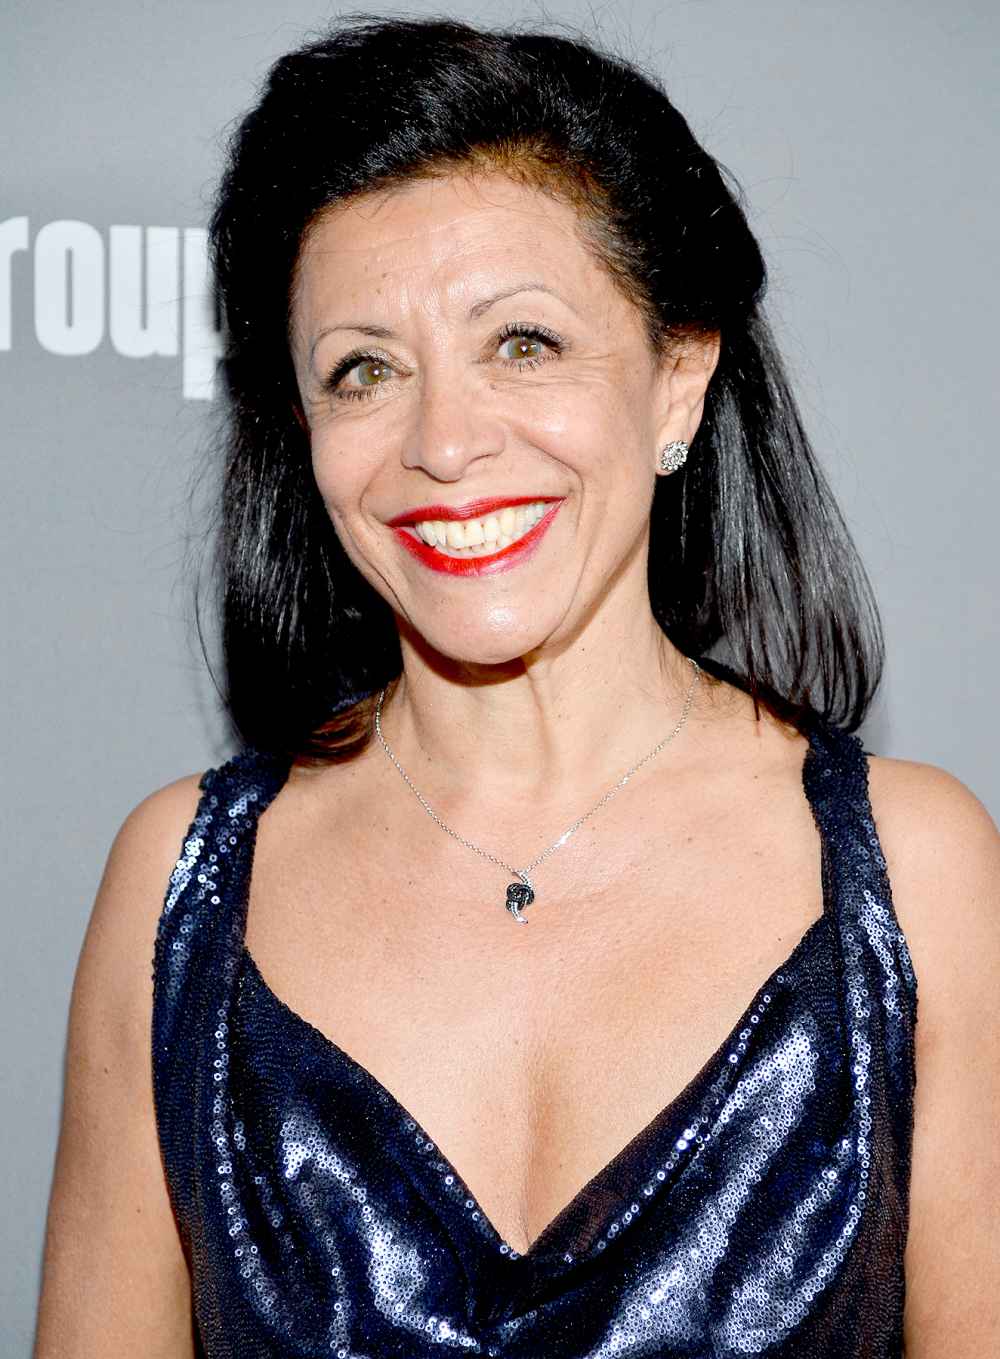 Jany Temime attends the 15th Annual Costume Designers Guild Awards with presenting sponsor Lacoste at The Beverly Hilton Hotel on February 19, 2013 in Beverly Hills, California.